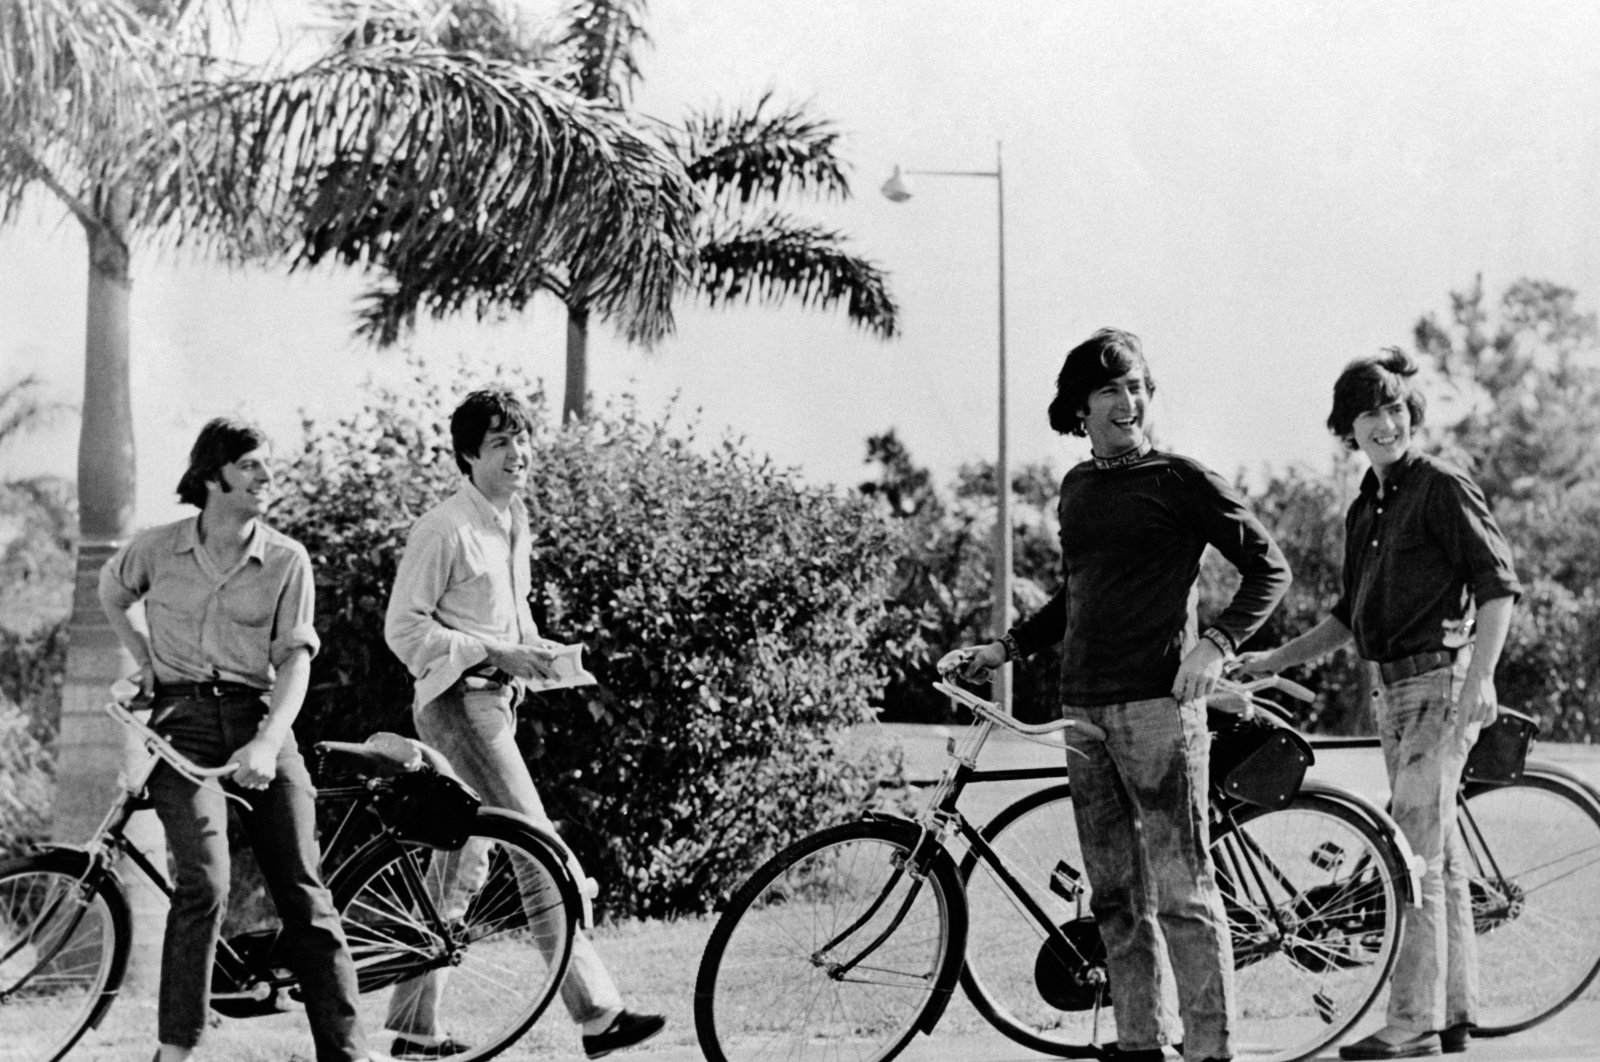 The singers, musicians and members of the English band The Beatles, John Lennon, Paul McCartney, George Harrison and Ringo Starr having fun riding bicycles in the 1960s. (Getty Images)